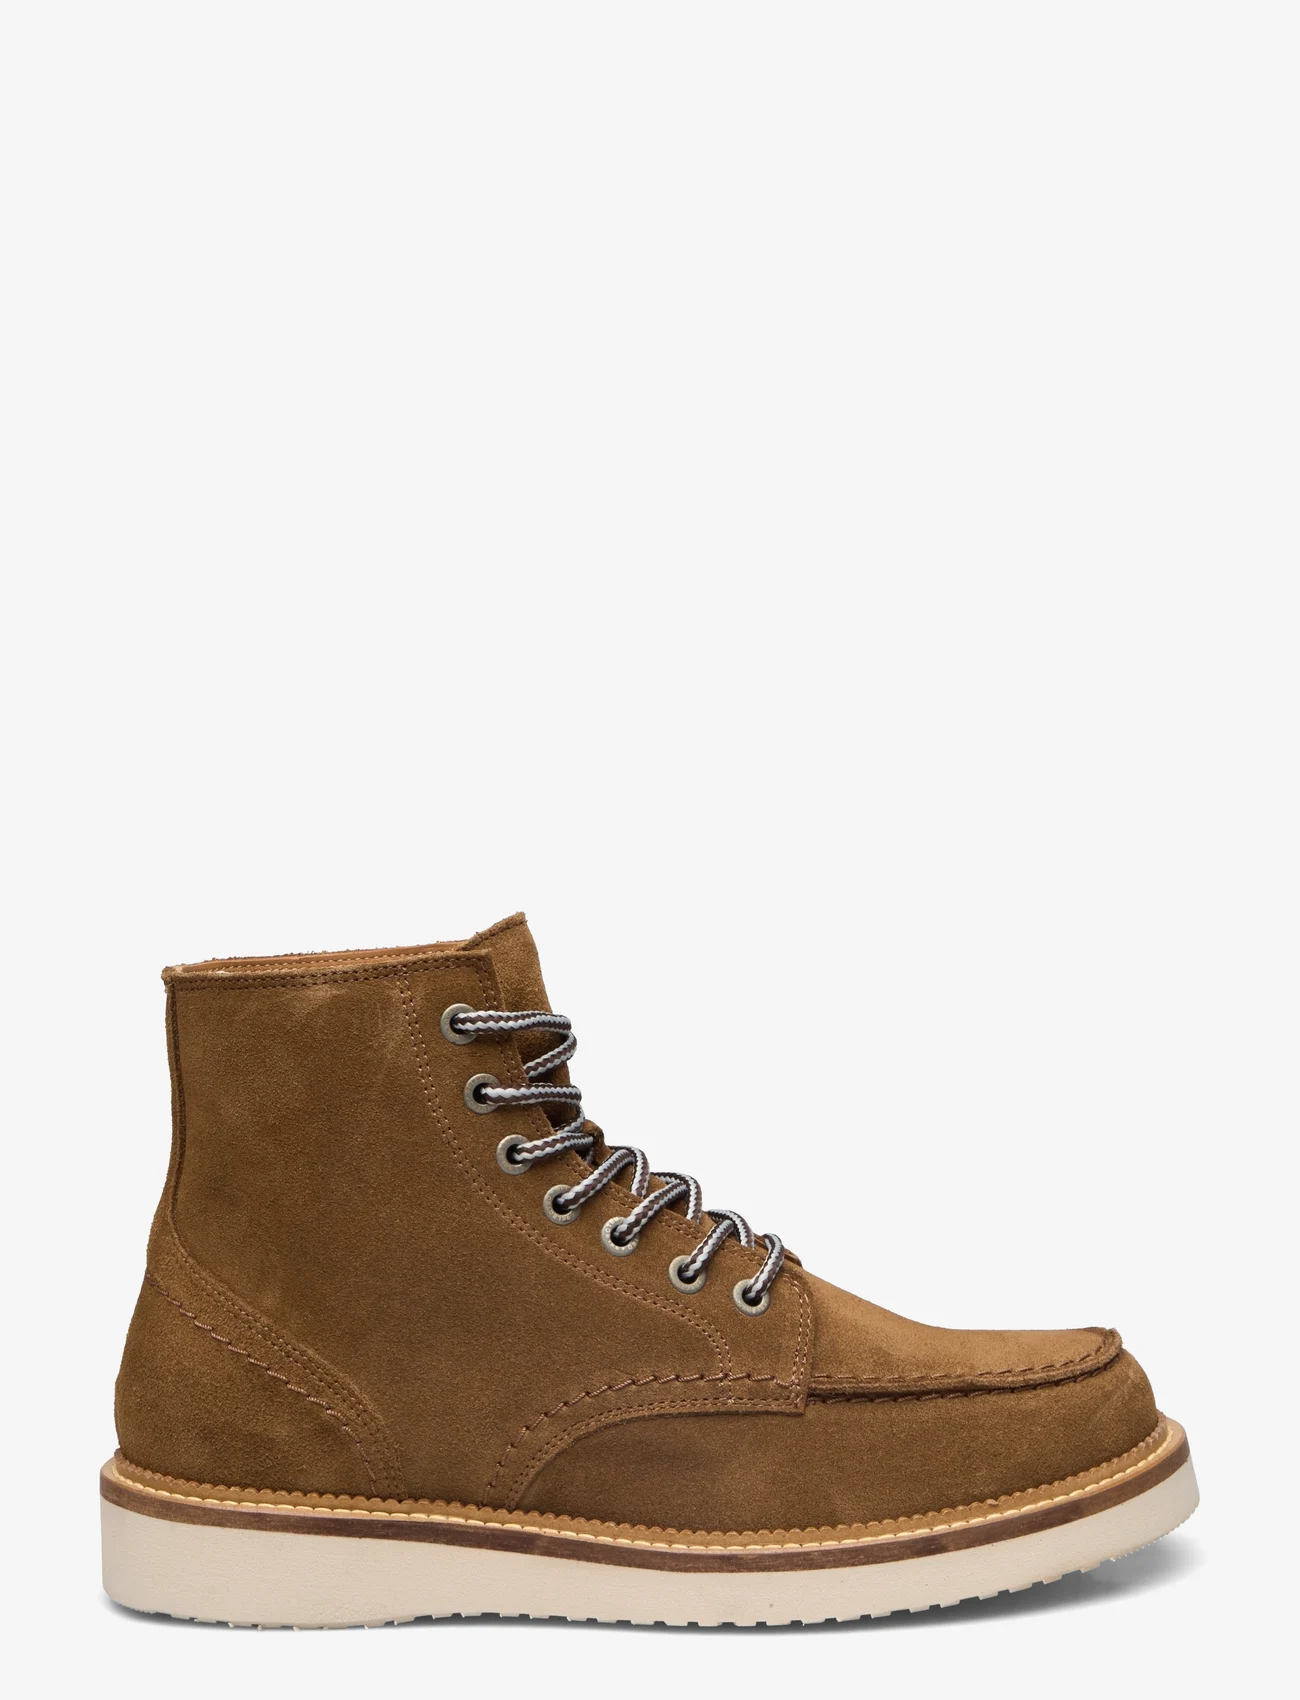 Selected Homme - SLHTEO NEW SUEDE MOC-TOE BOOT B - lace ups - tobacco brown - 1